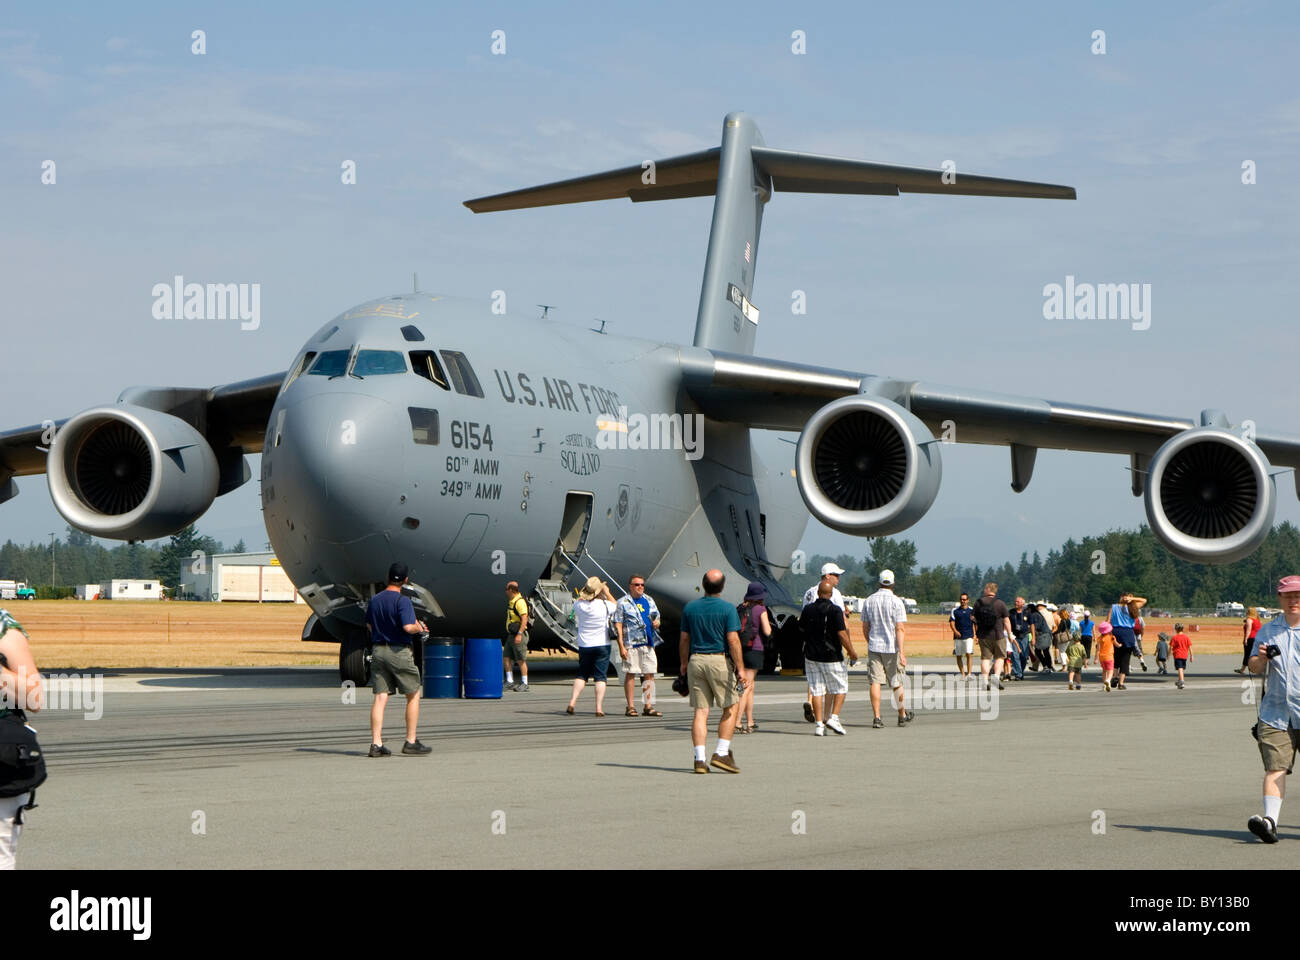 U.S. Air Force plane on ground at air show Stock Photo